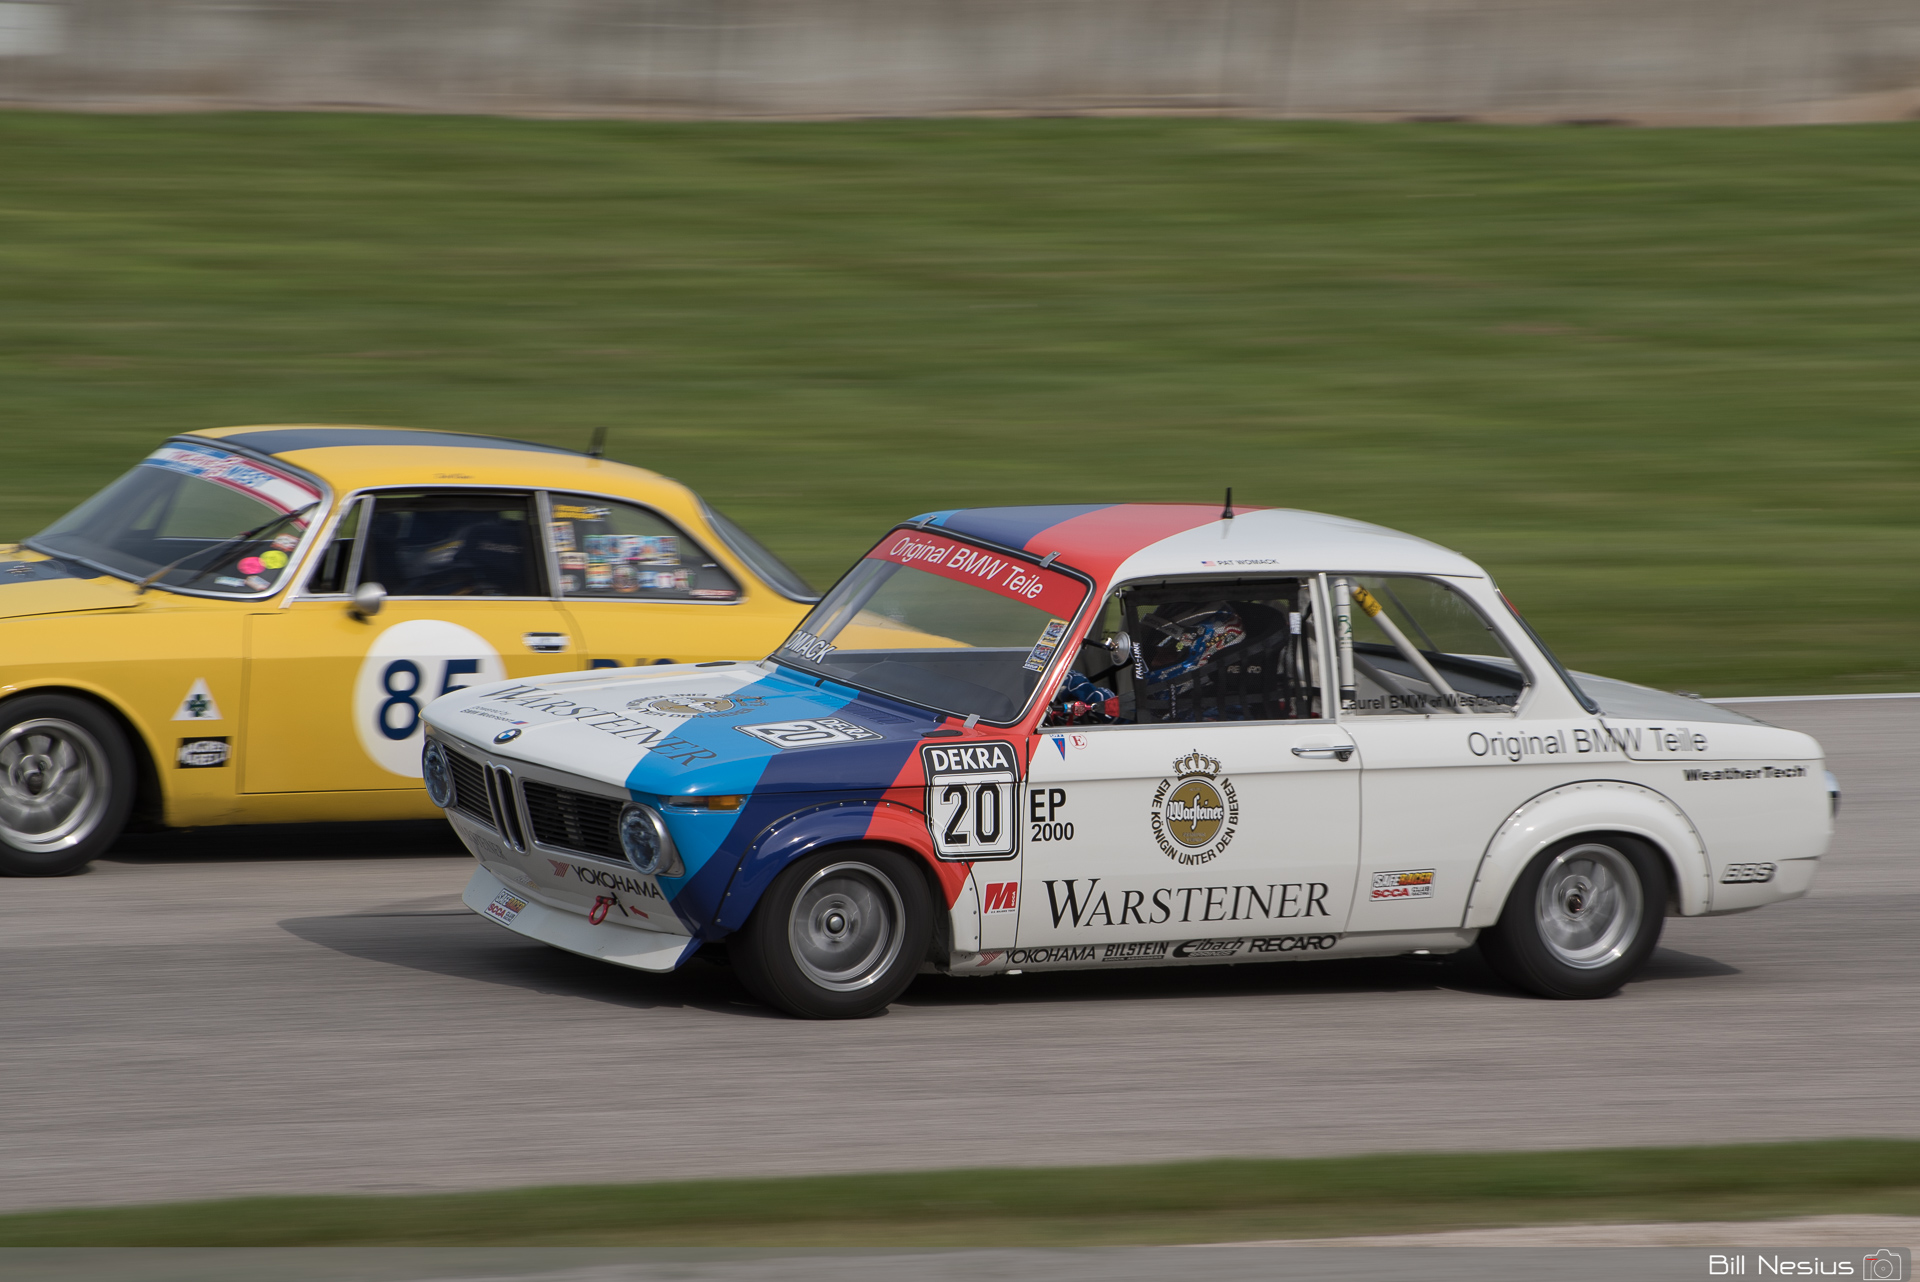 1973 BMW 2002 #20 in turn 9 driven by Patrick Womack / DSC_3714 / 4